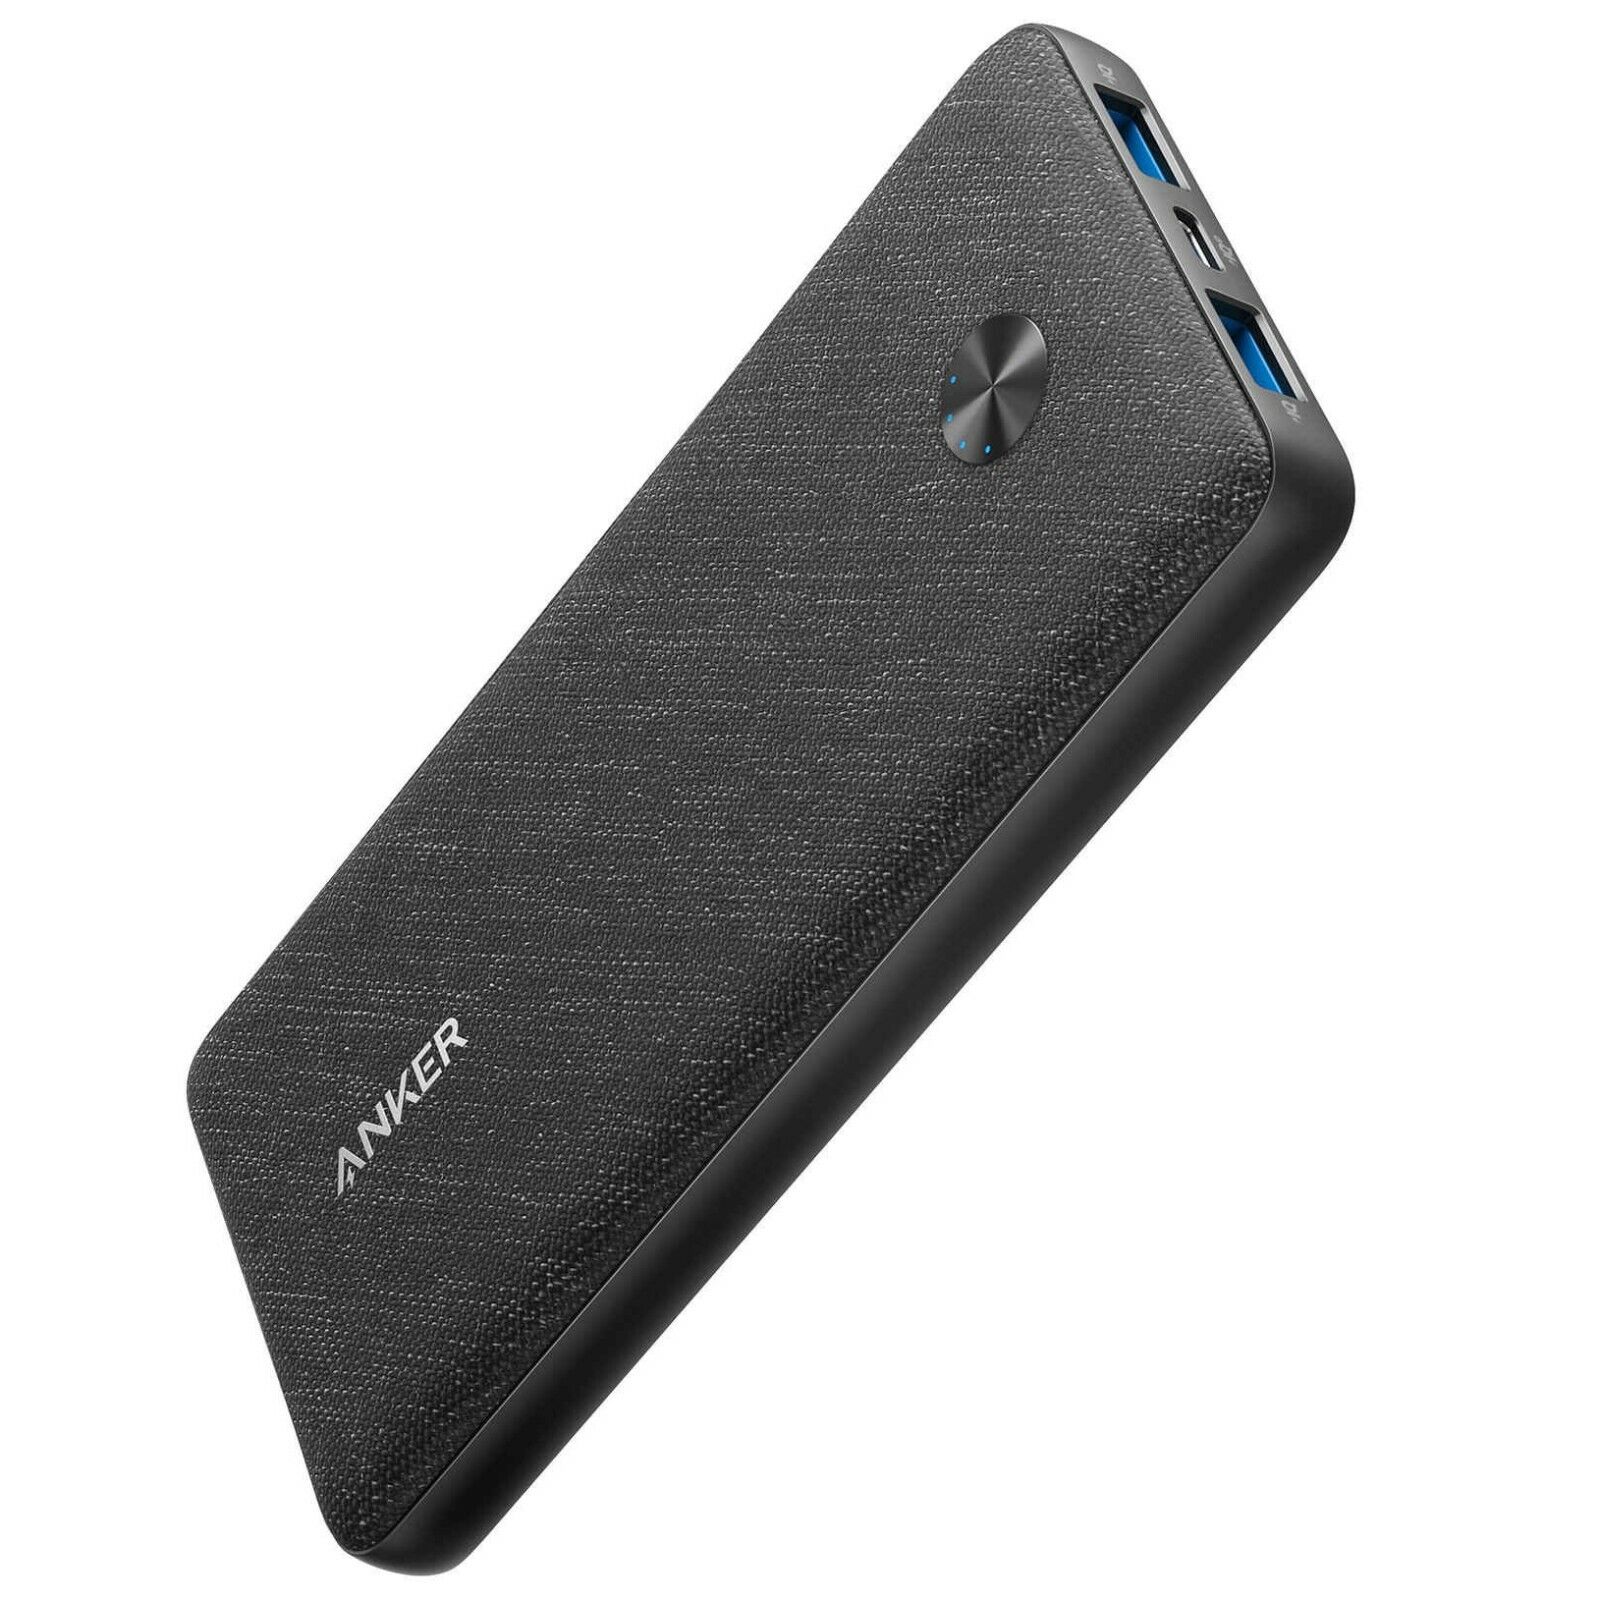 Anker Power Bank Powercore Iii Sense 10000Mah With 2 Ports USB And 1 Port Pd Fabric - Black